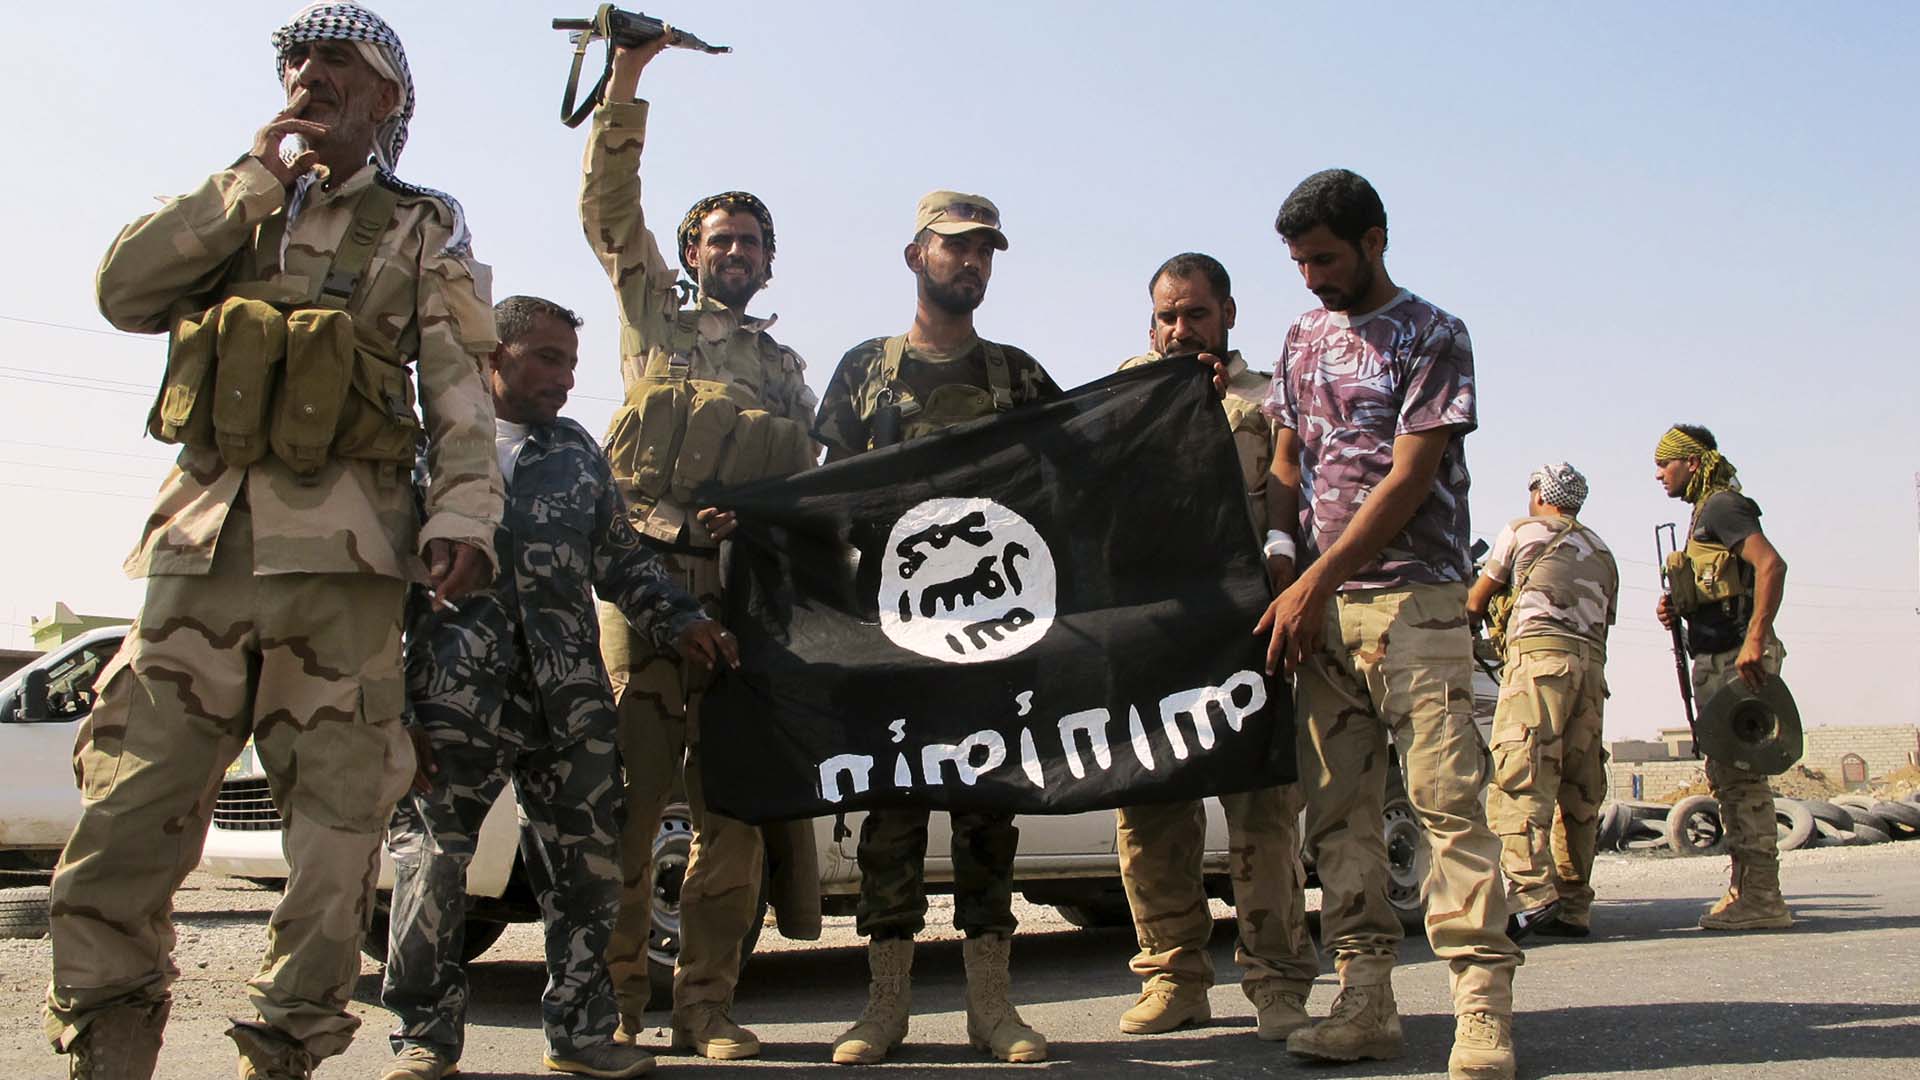 It's trendy to pose with an inverted ISIS flag once you capture their territory. Img from MonsterChildren.